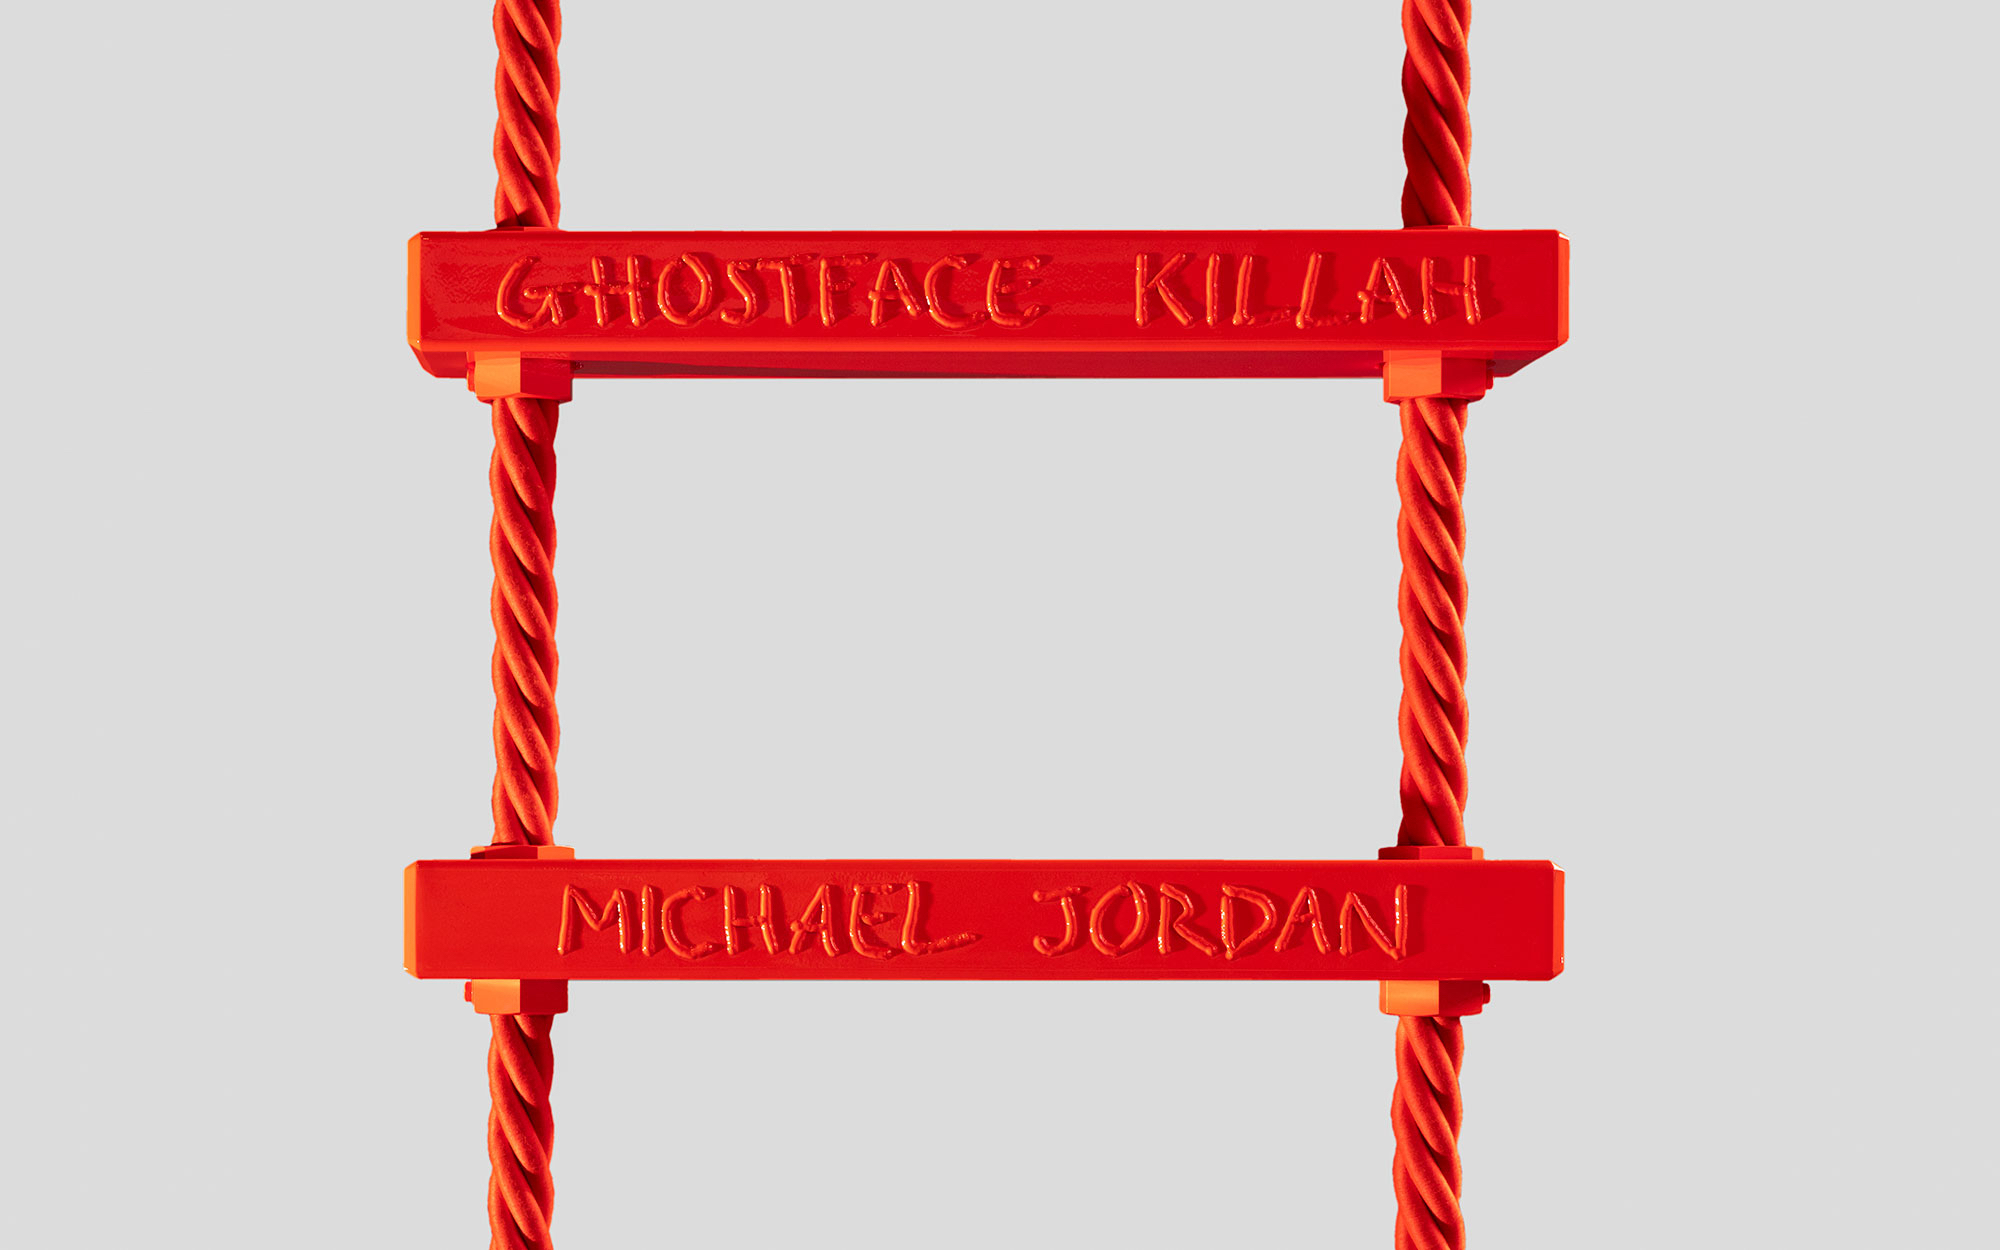 “WORLD LEADERS“ Ladder Special Commission - Virgil Abloh - Miscellaneous - Galerie kreo